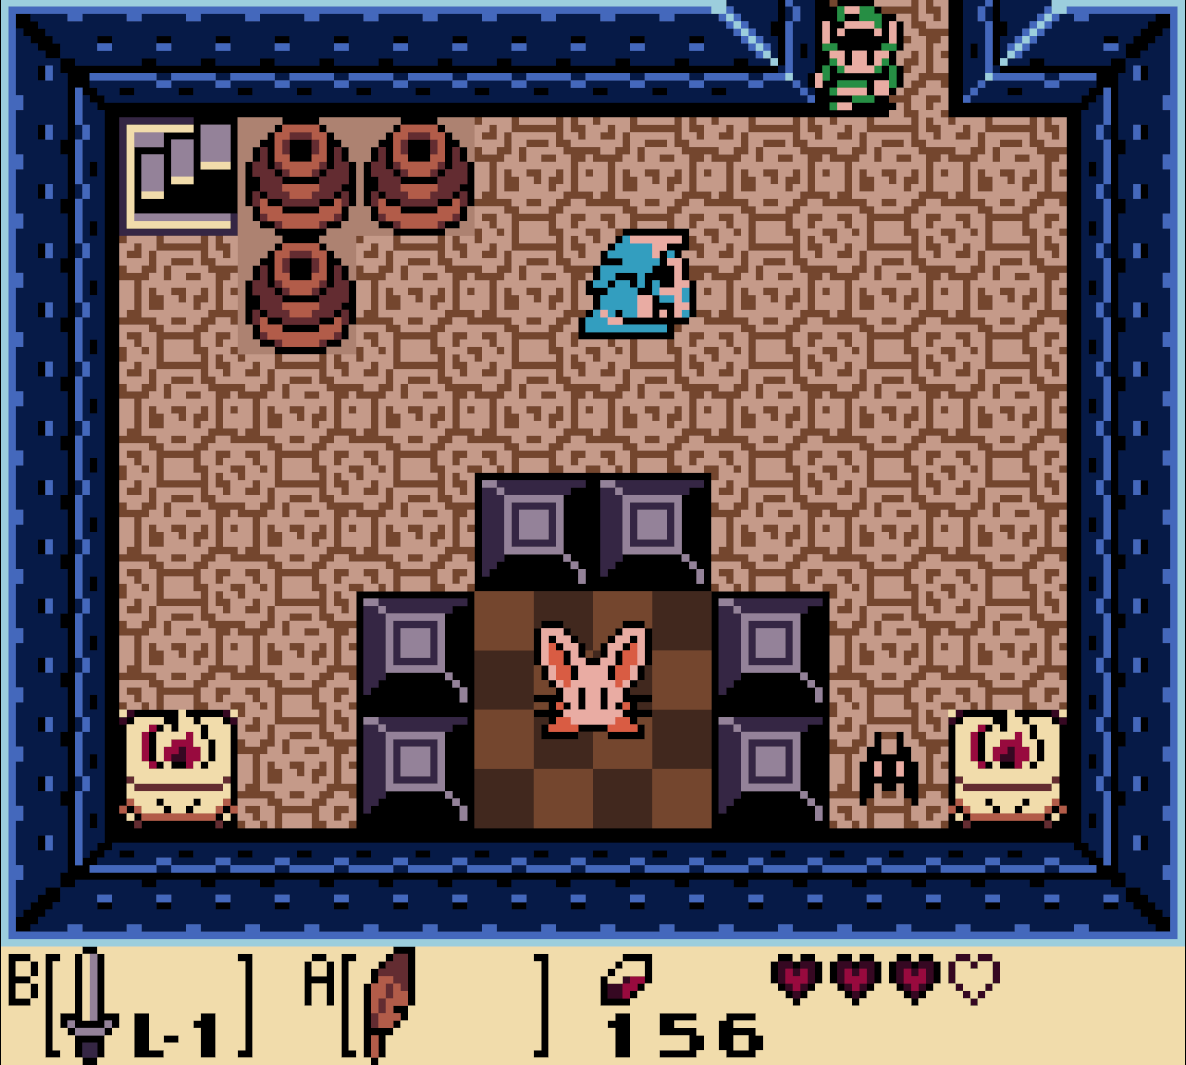 Pols Voice room in Link's Awakening DX on the Game boy